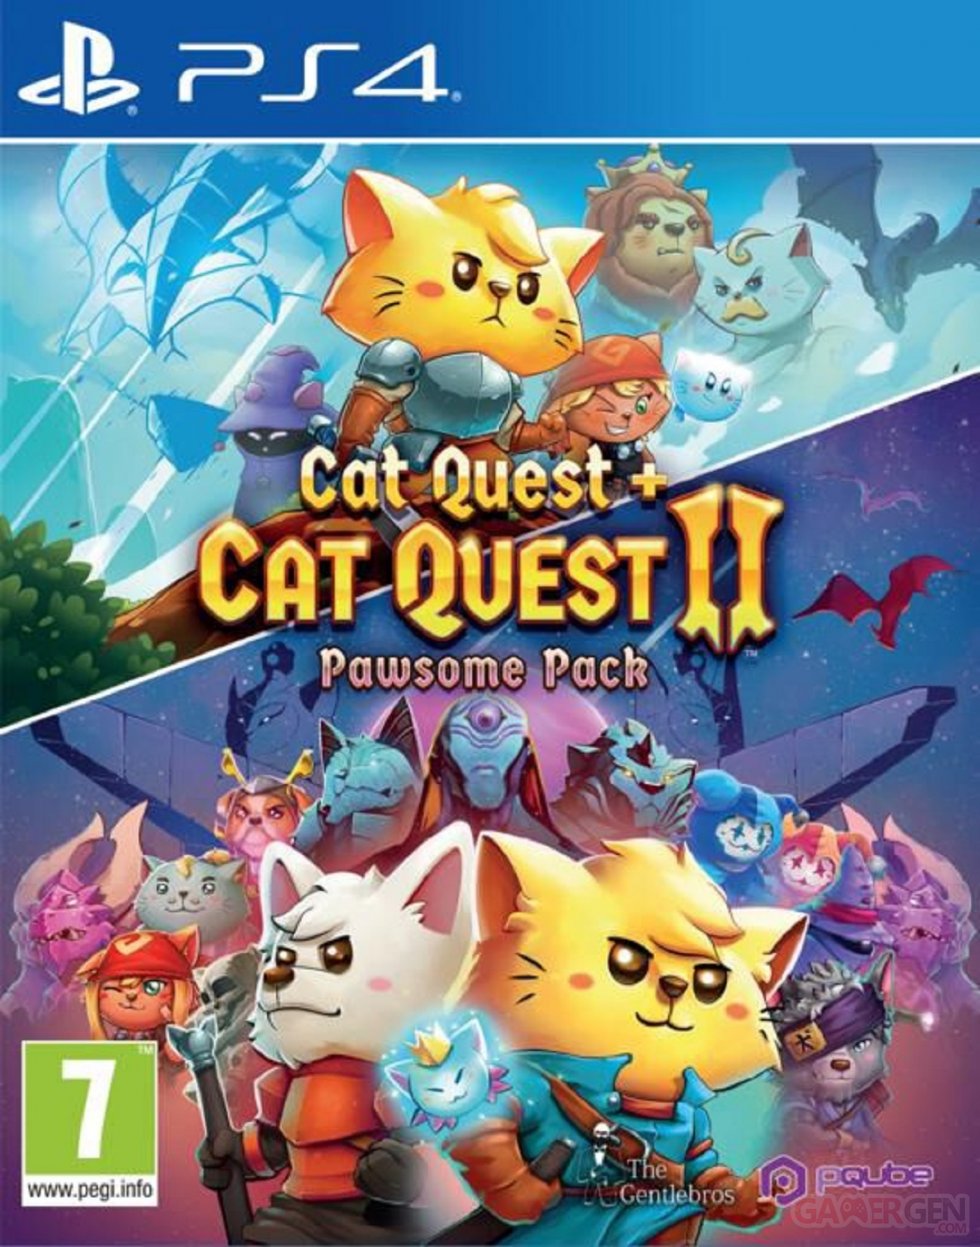 Pawsome Pack Cat Quest PS4